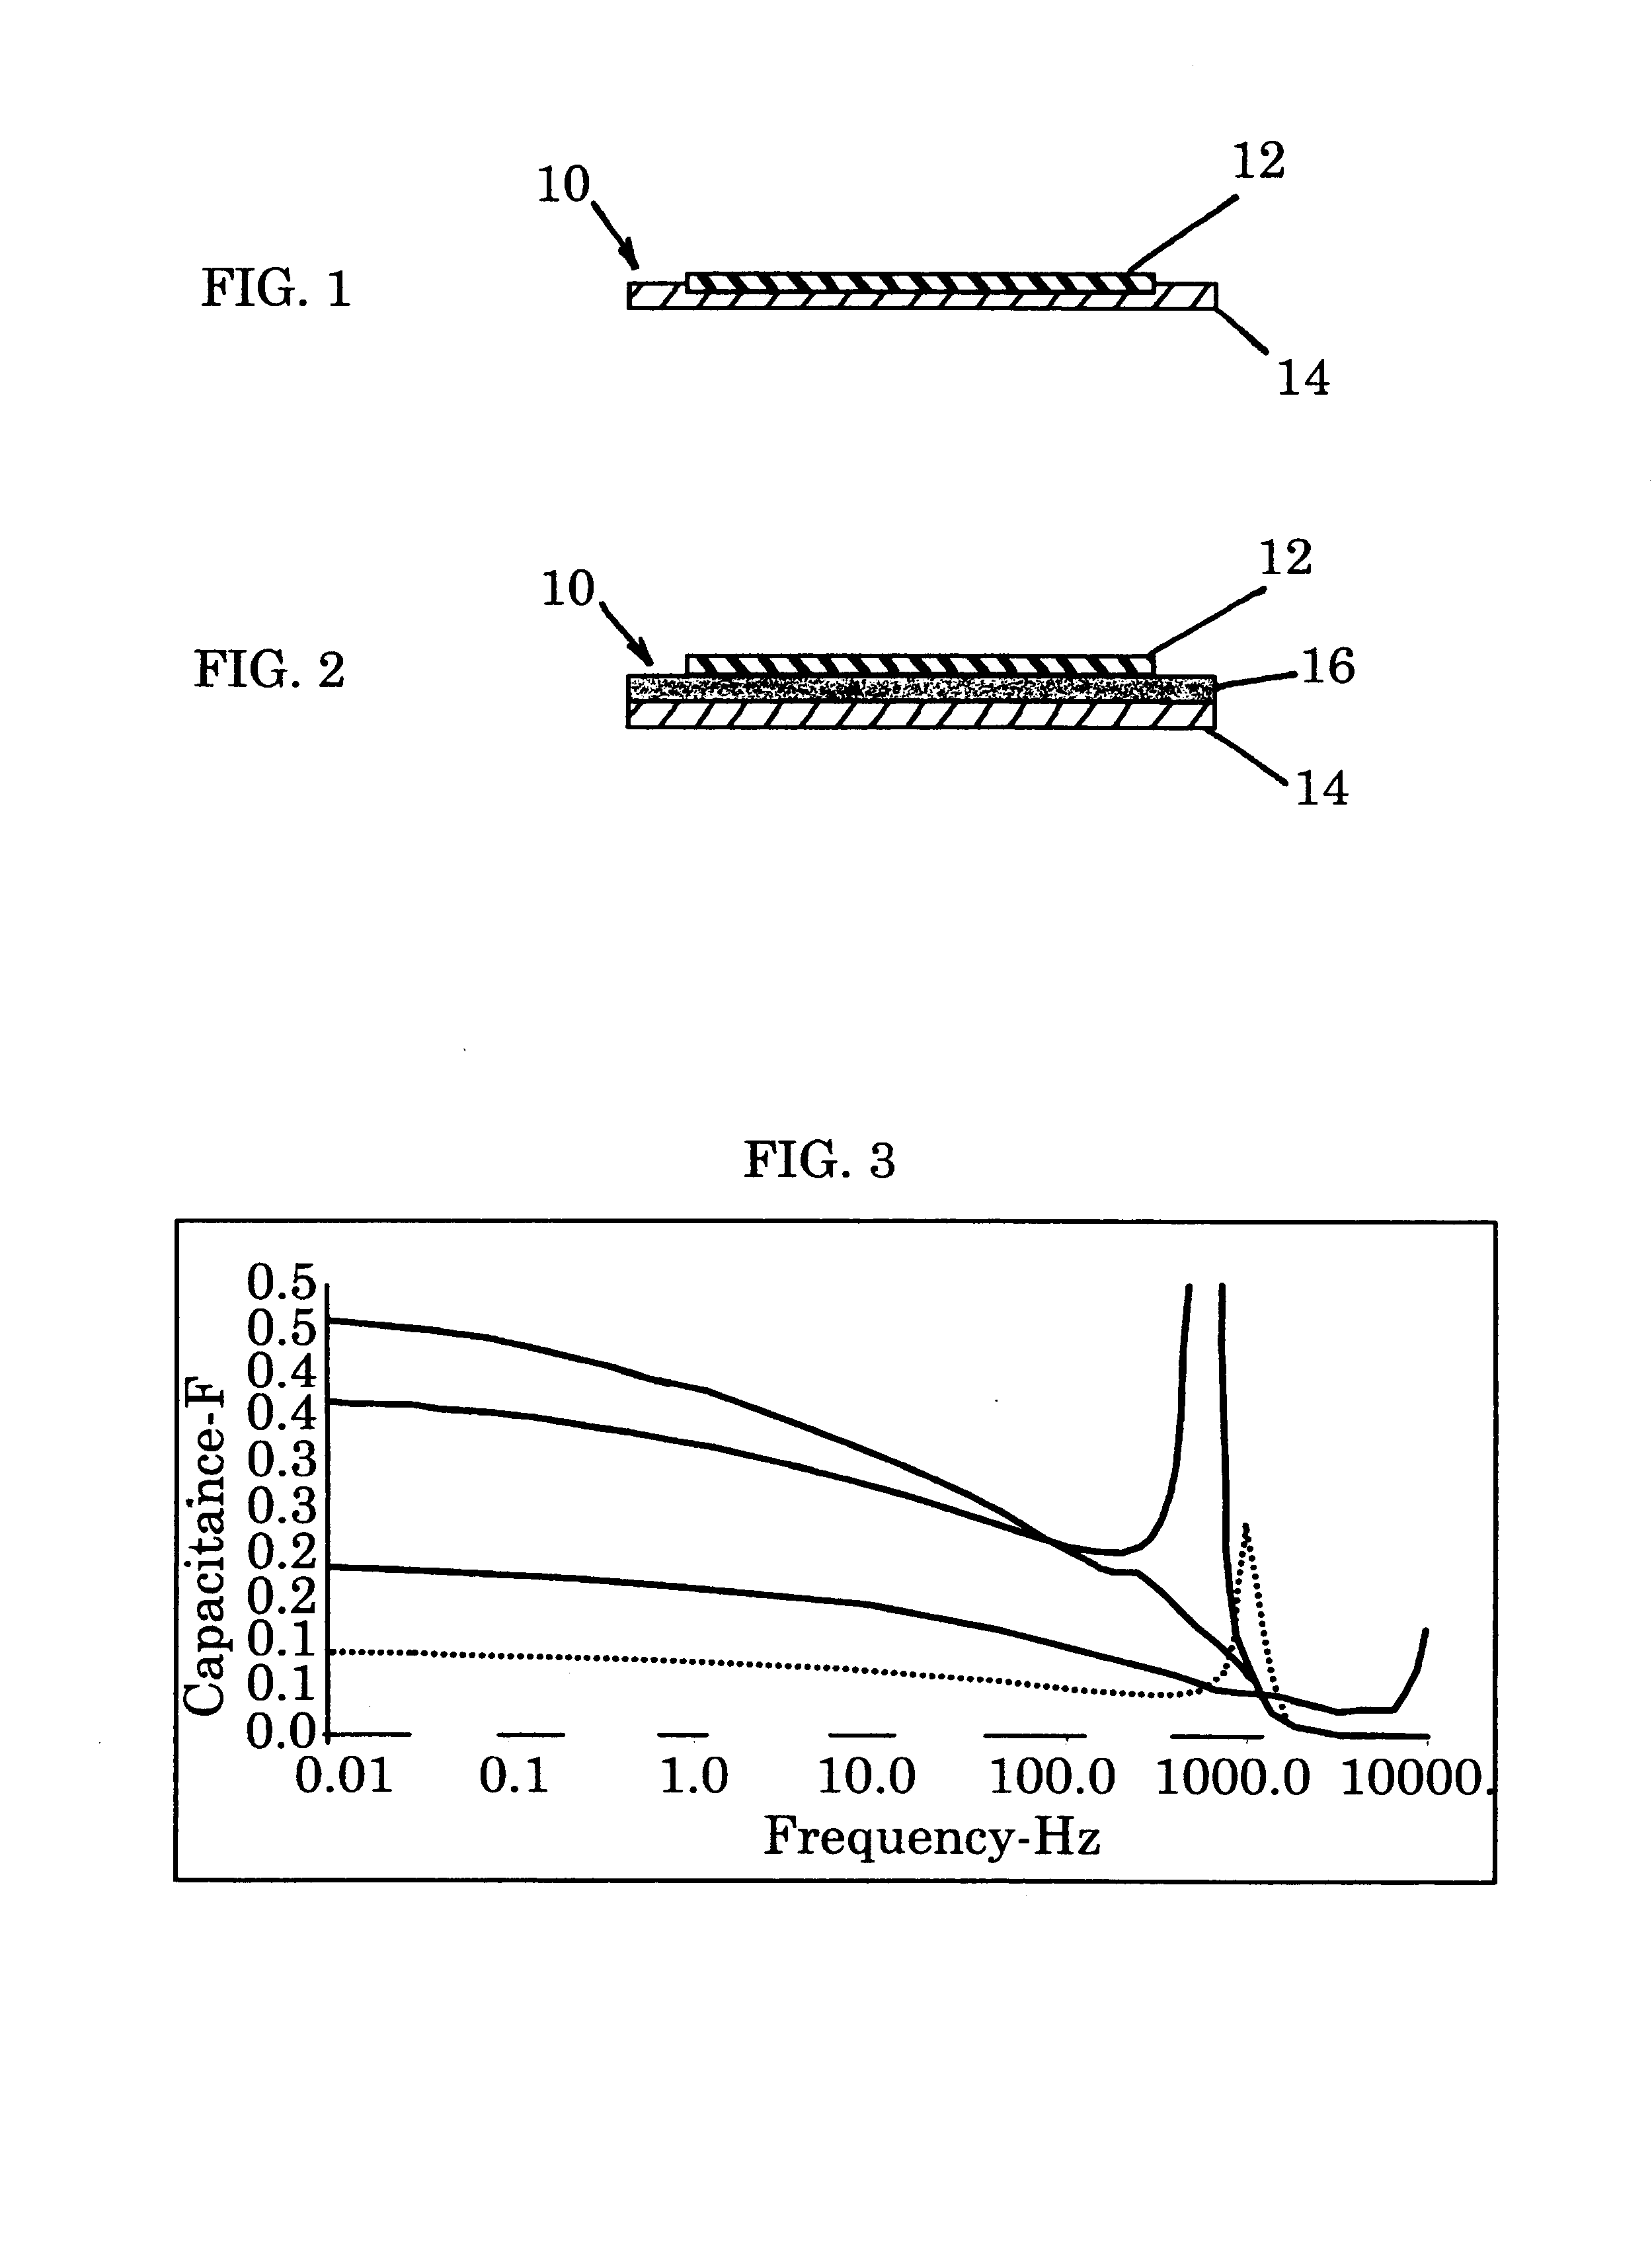 Thin-coat metal oxide electrode for an electrochemical capacitor